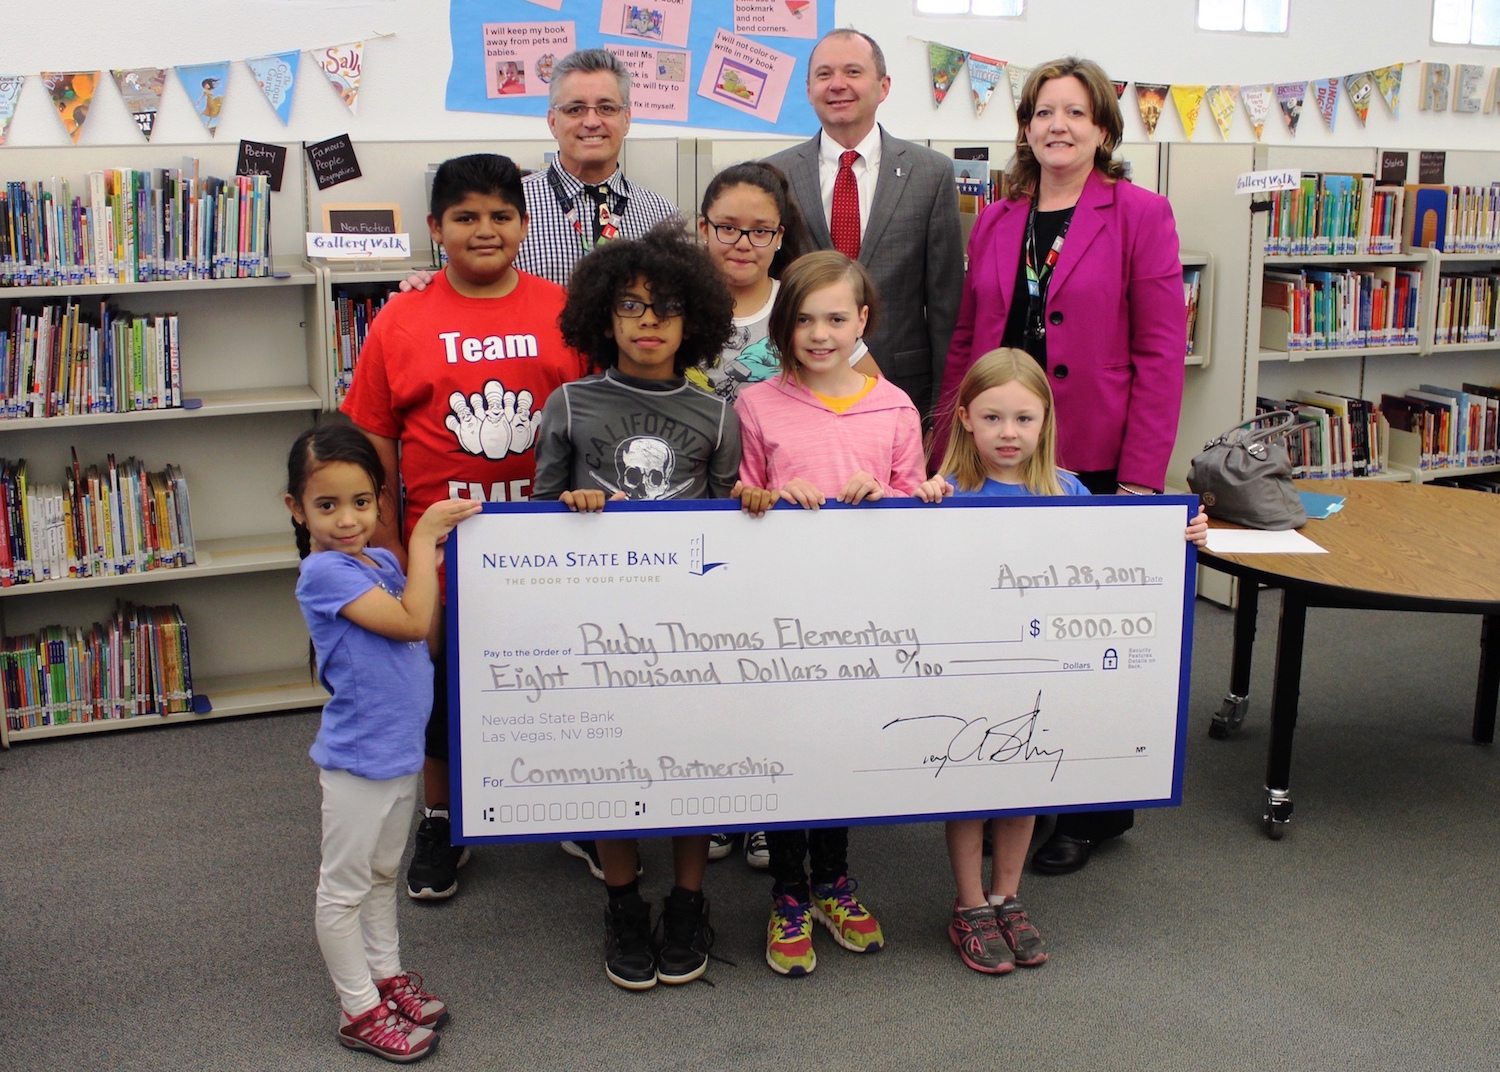 Nevada State Bank presented a check for $8,000 to Ruby Thomas Elementary School in celebration of Teach Children to Save, to support their education efforts